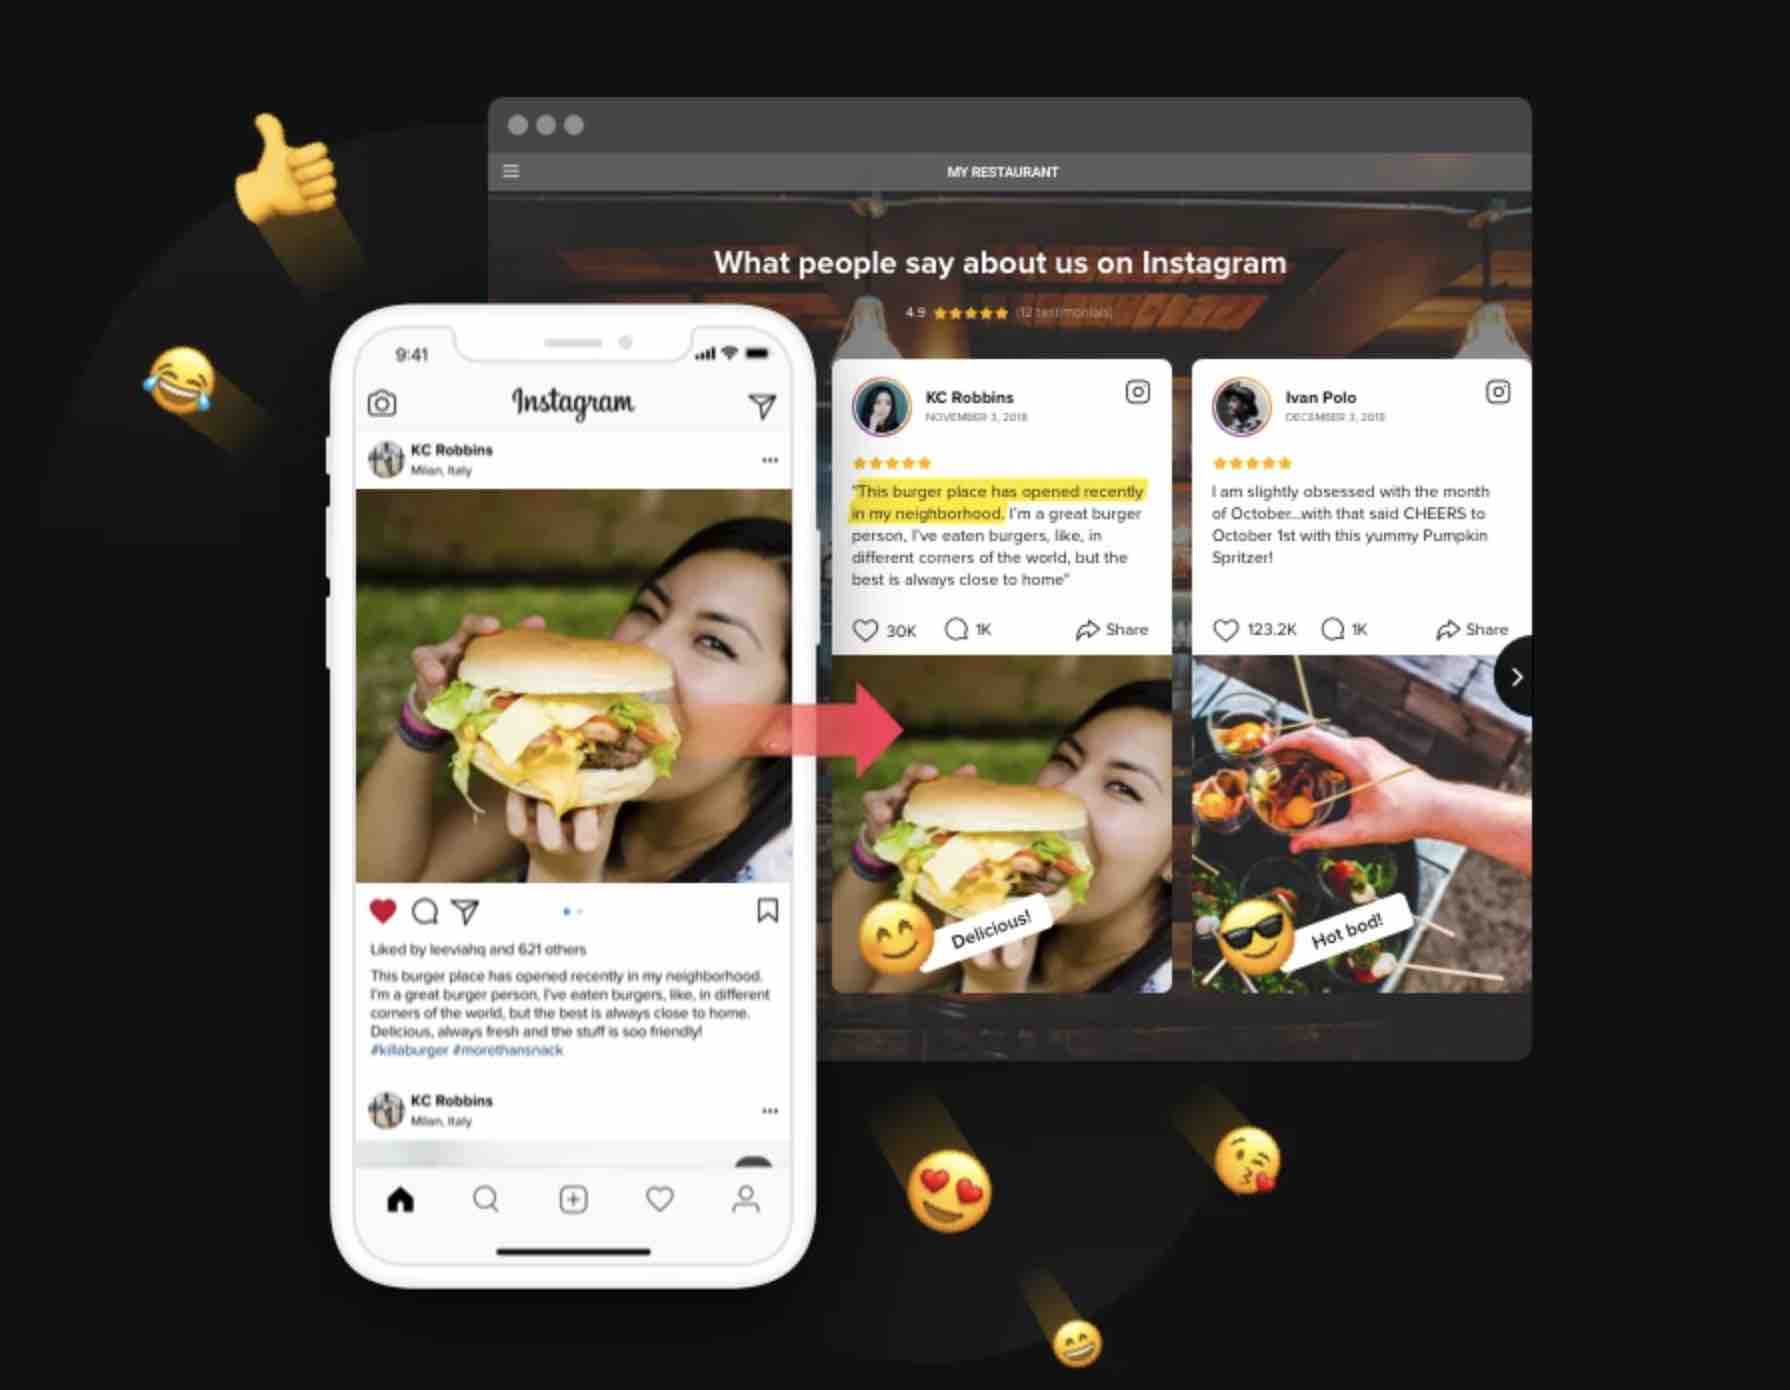 Instagram Testimonials allows you to integrate customer reviews from Instagram into WordPress.